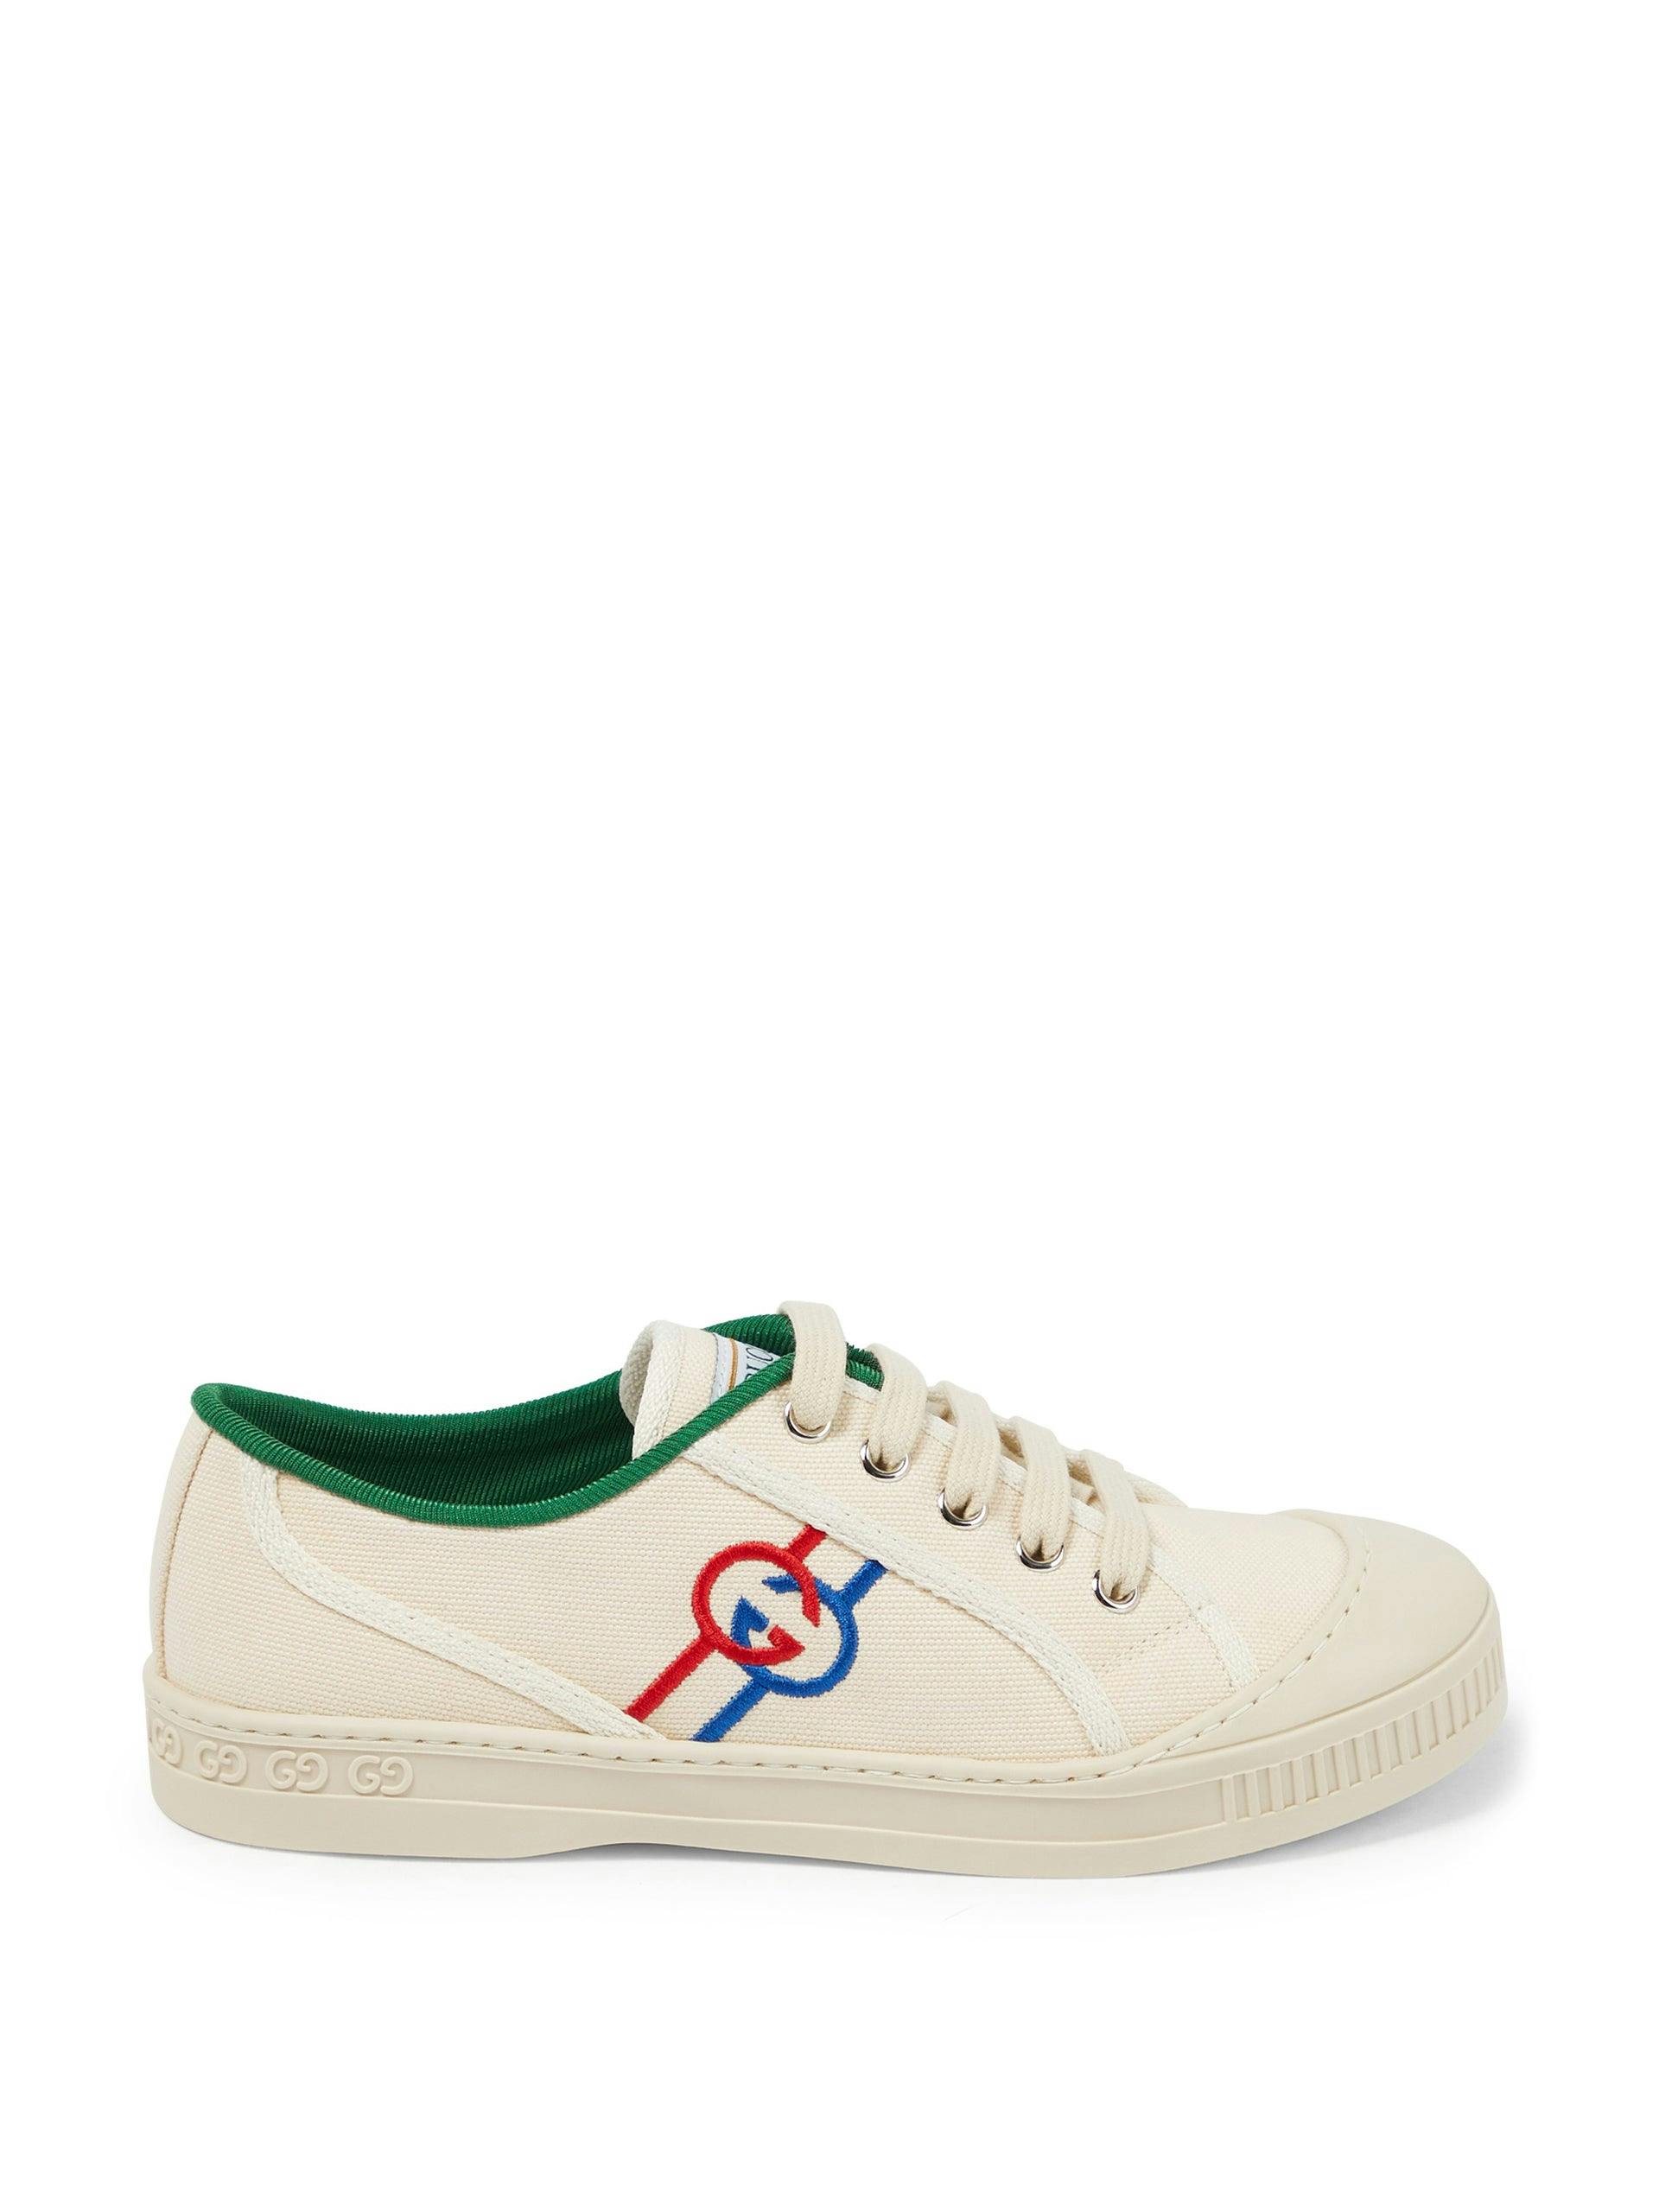 GG canvas sneakers